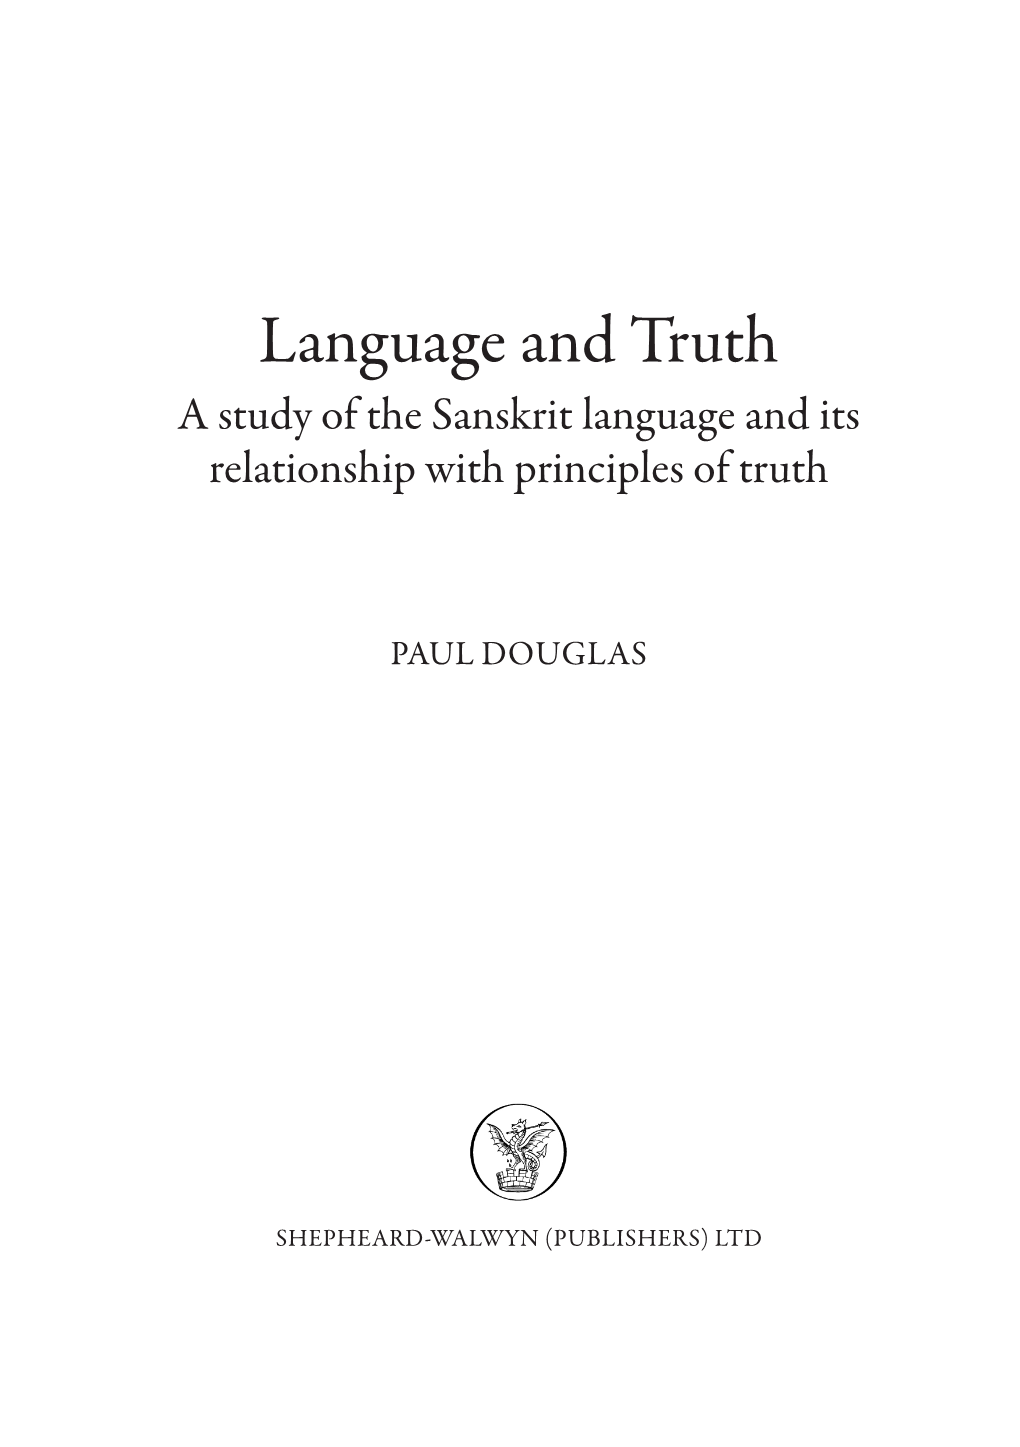 Language and Truth a Study of the Sanskrit Language and Its Relationship with Principles of Truth